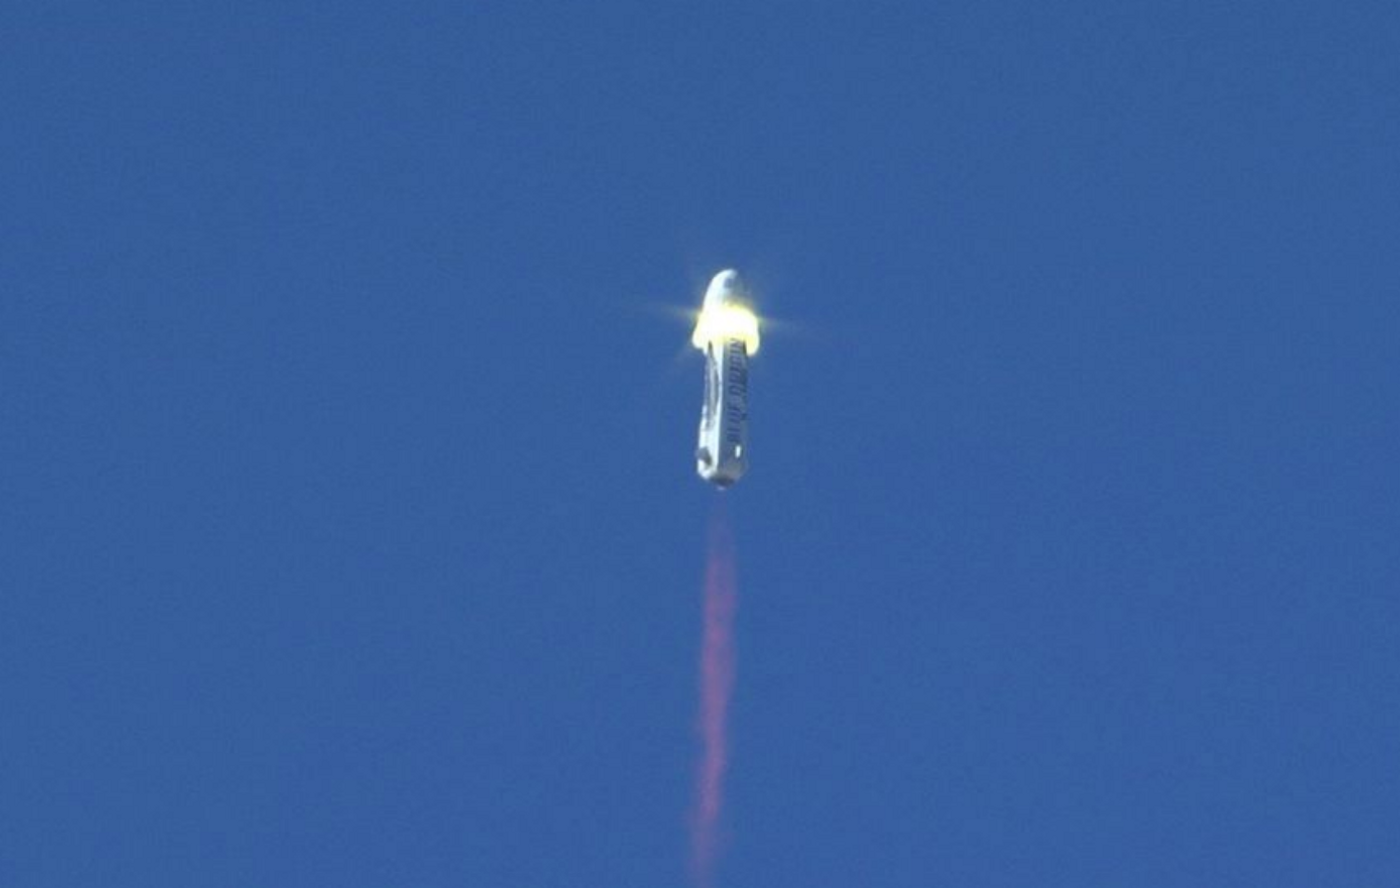 Blue Origin's New Shepard rocket came in for a successful ground landing even following the doubt against it landing successfull after the safety test.